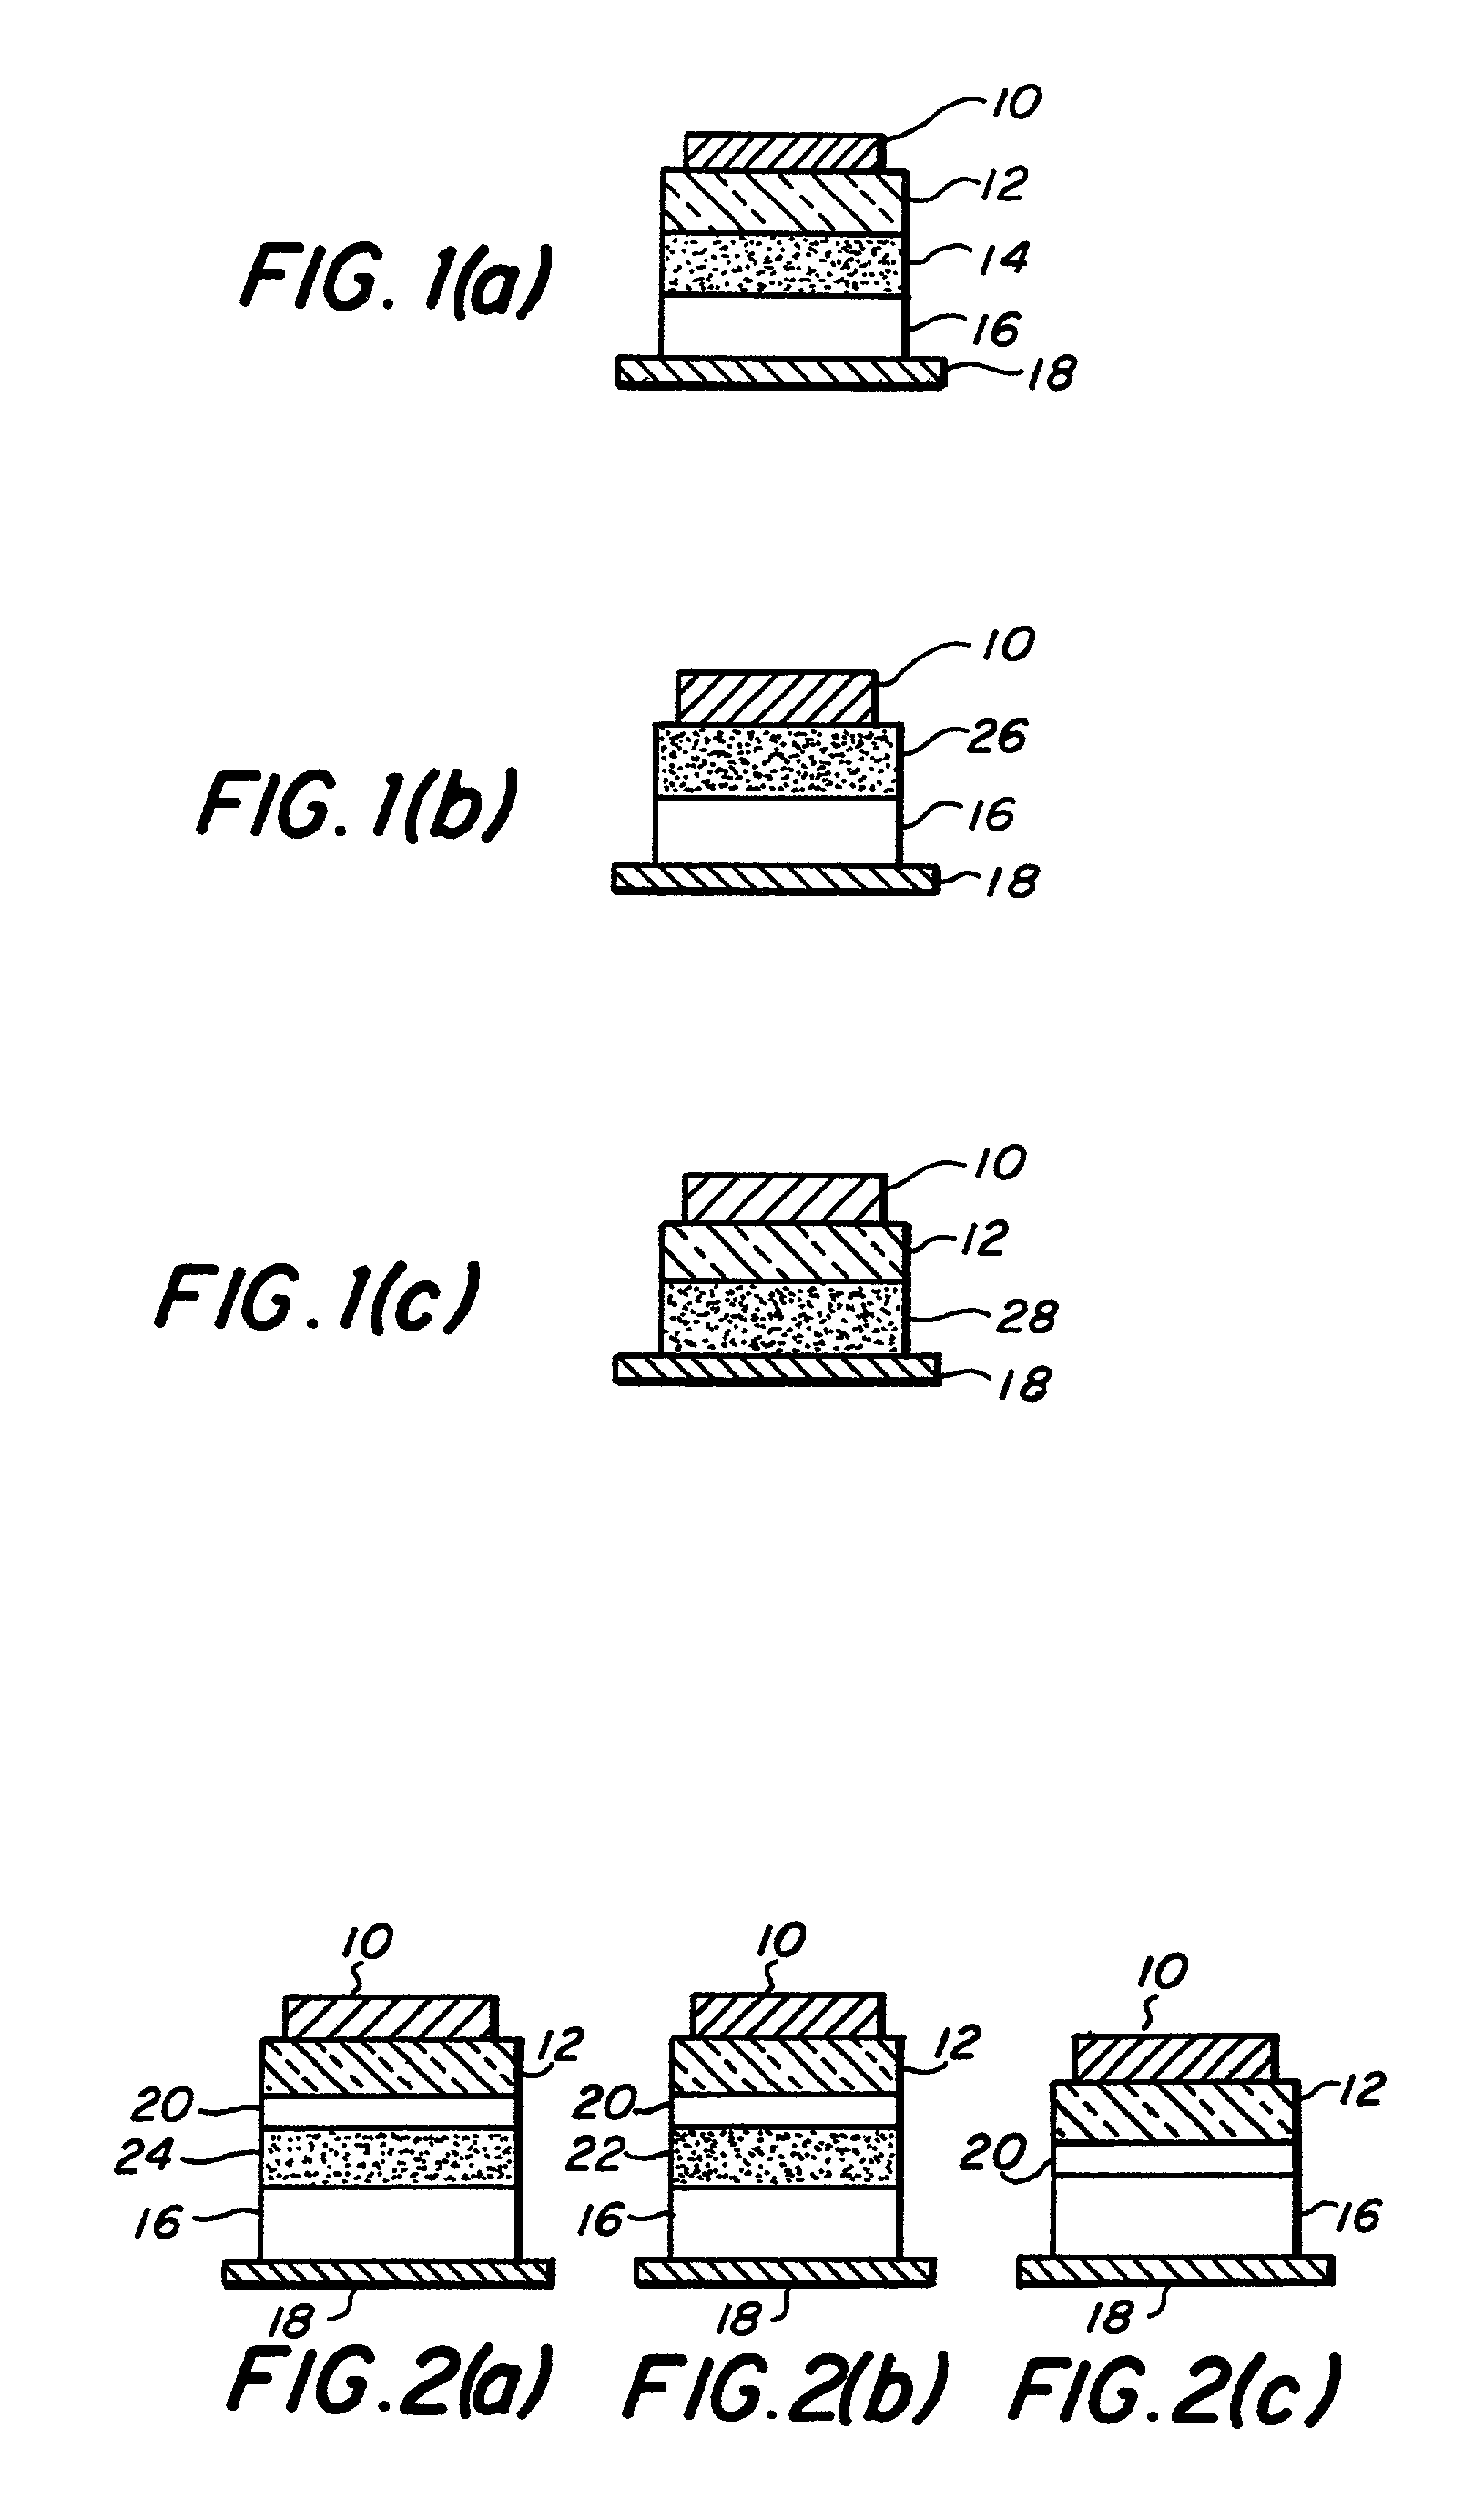 Universal host for RG or RGB emission in organic light emitting devices